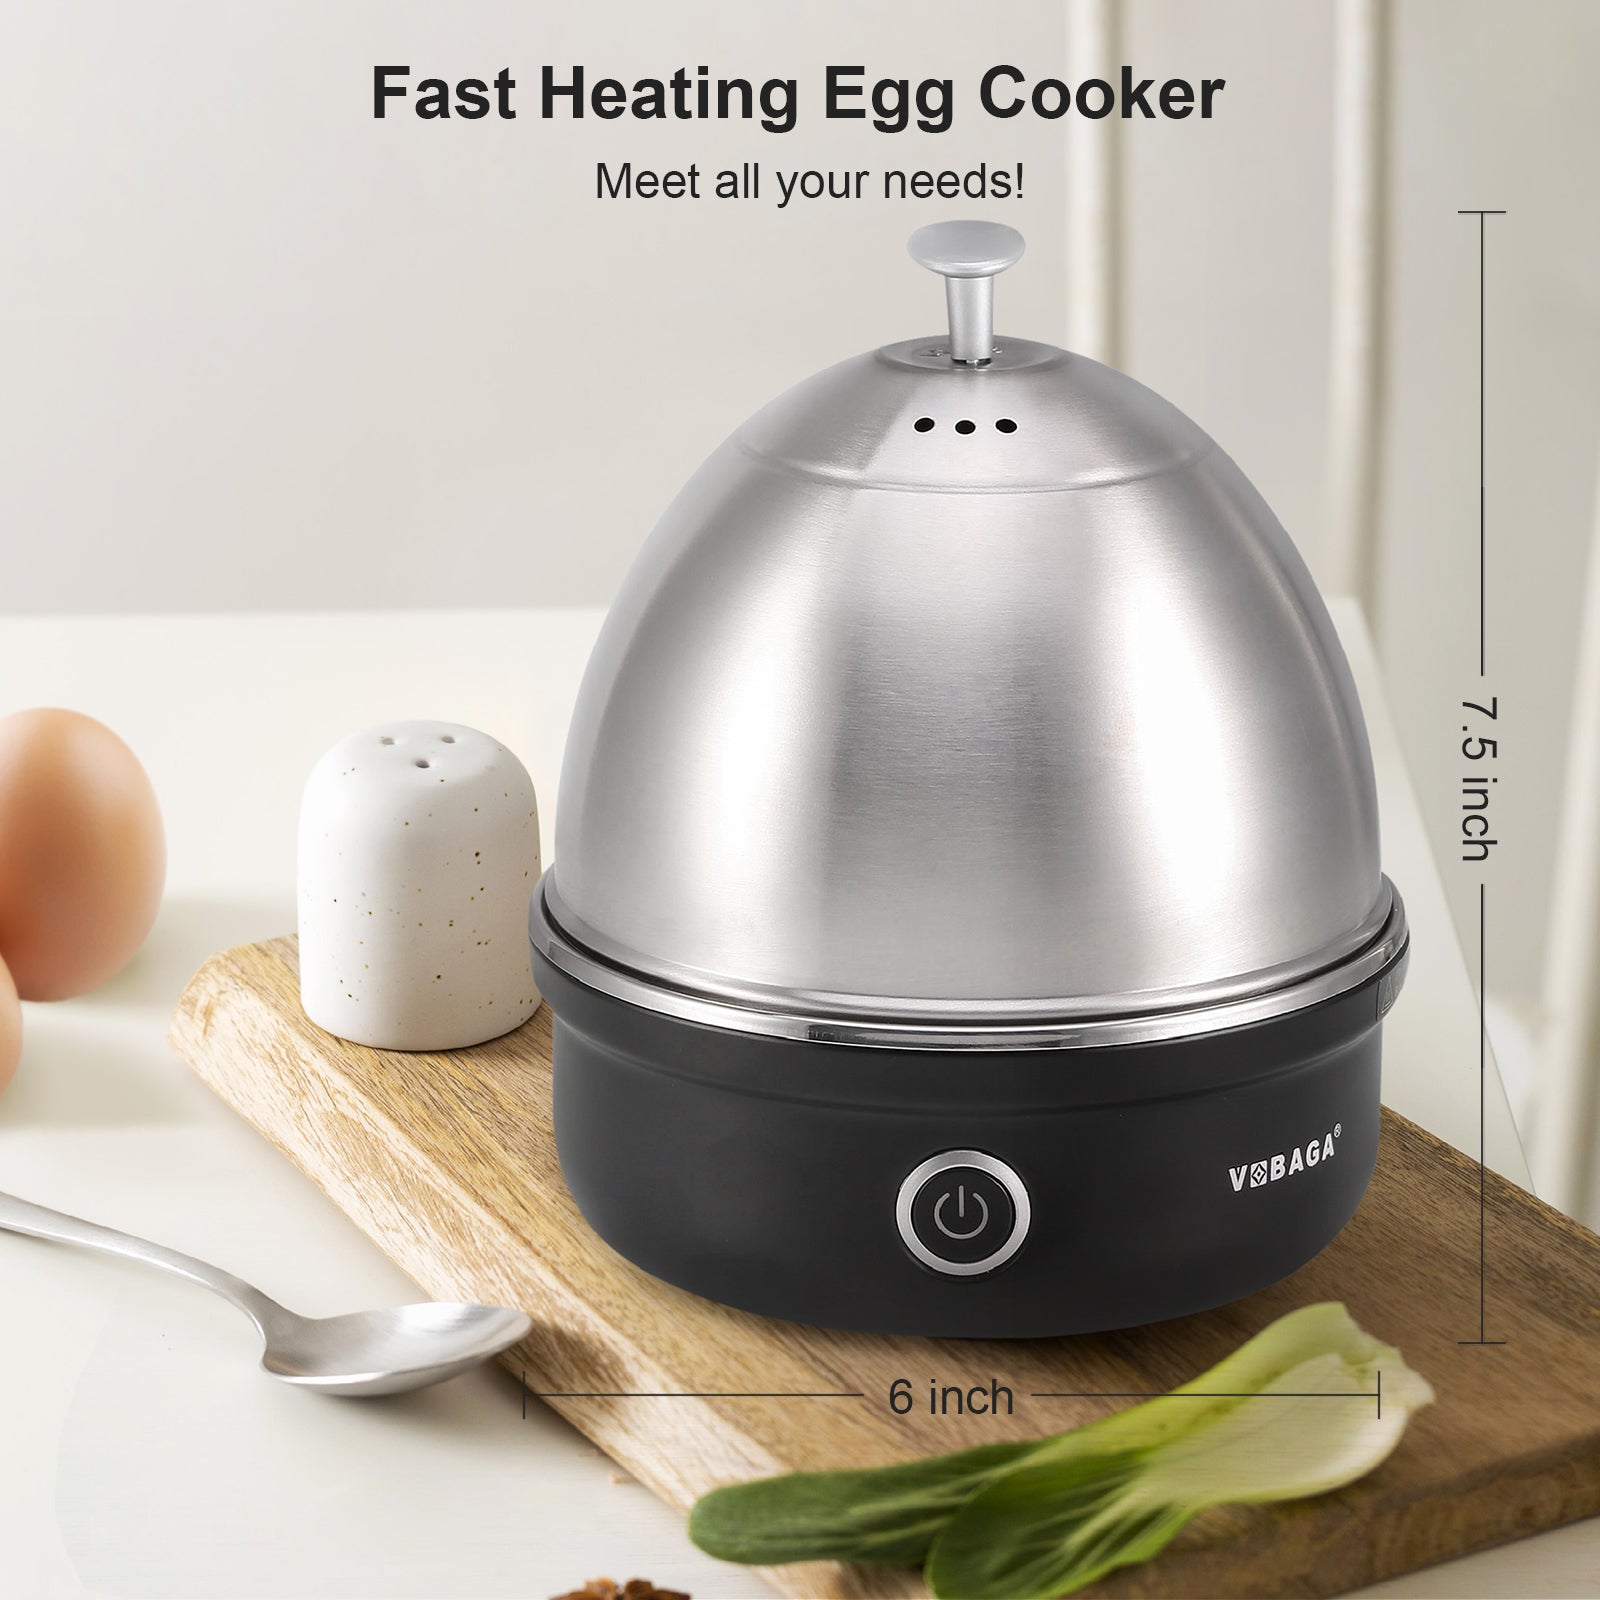  VOBAGA Electric Egg Cooker, Rapid Egg Boiler with Auto Shut Off  for Soft, Medium, Hard Boiled, Poached, Steamed Eggs, Vegetables and  Dumplings, Stainless Steel Tray with 7-Egg Capacity (Green): Home 